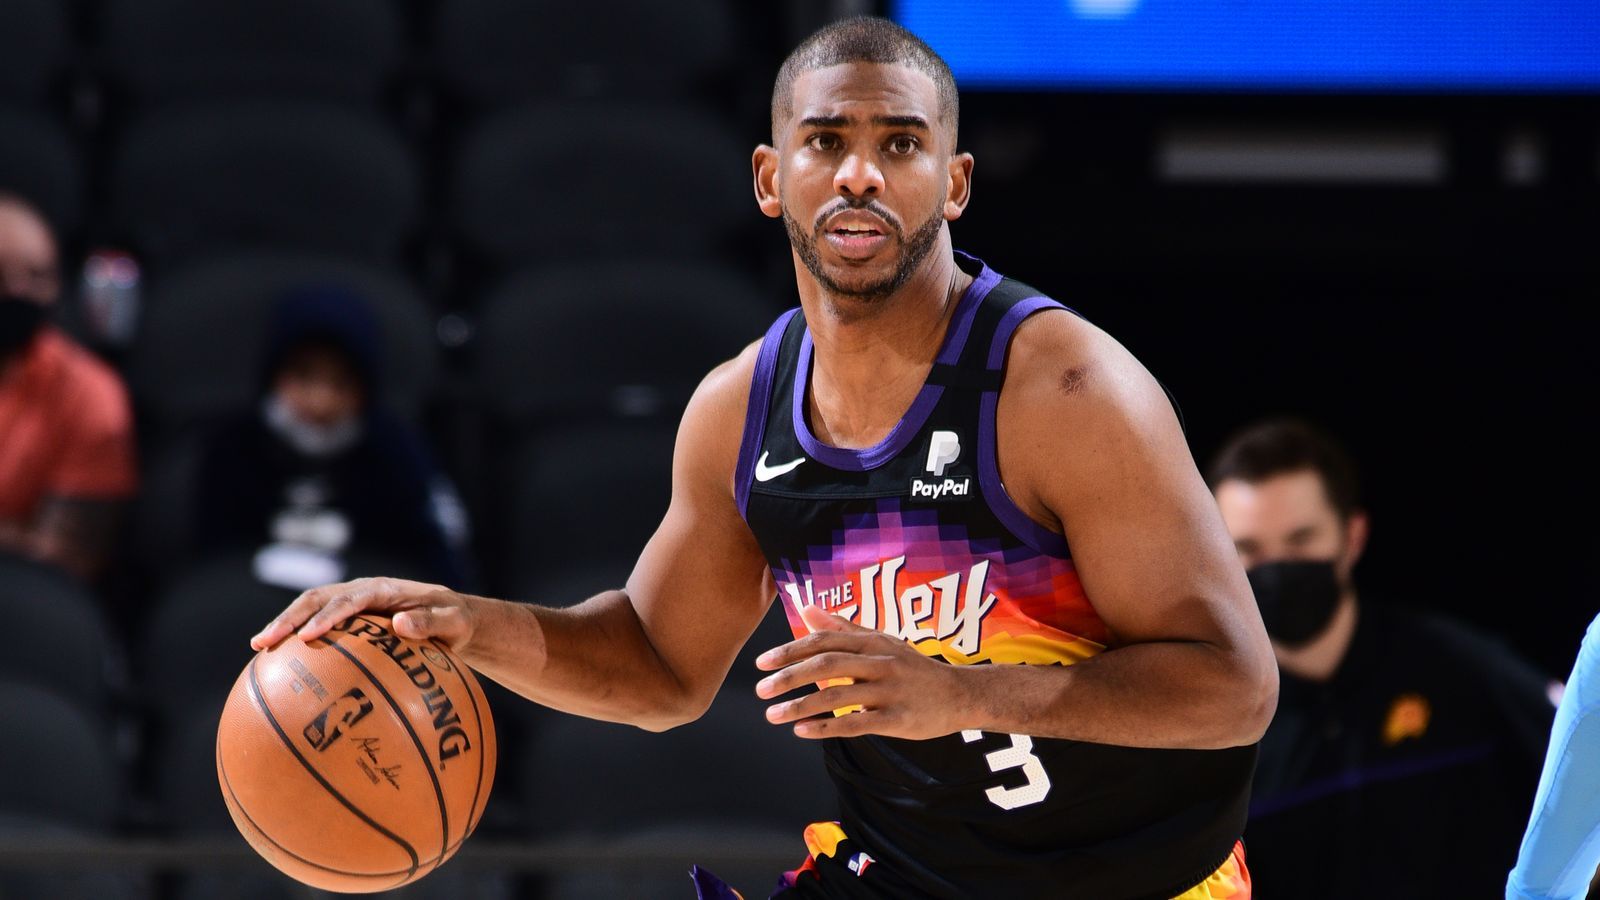 Chris Paul: 000 assists and counting